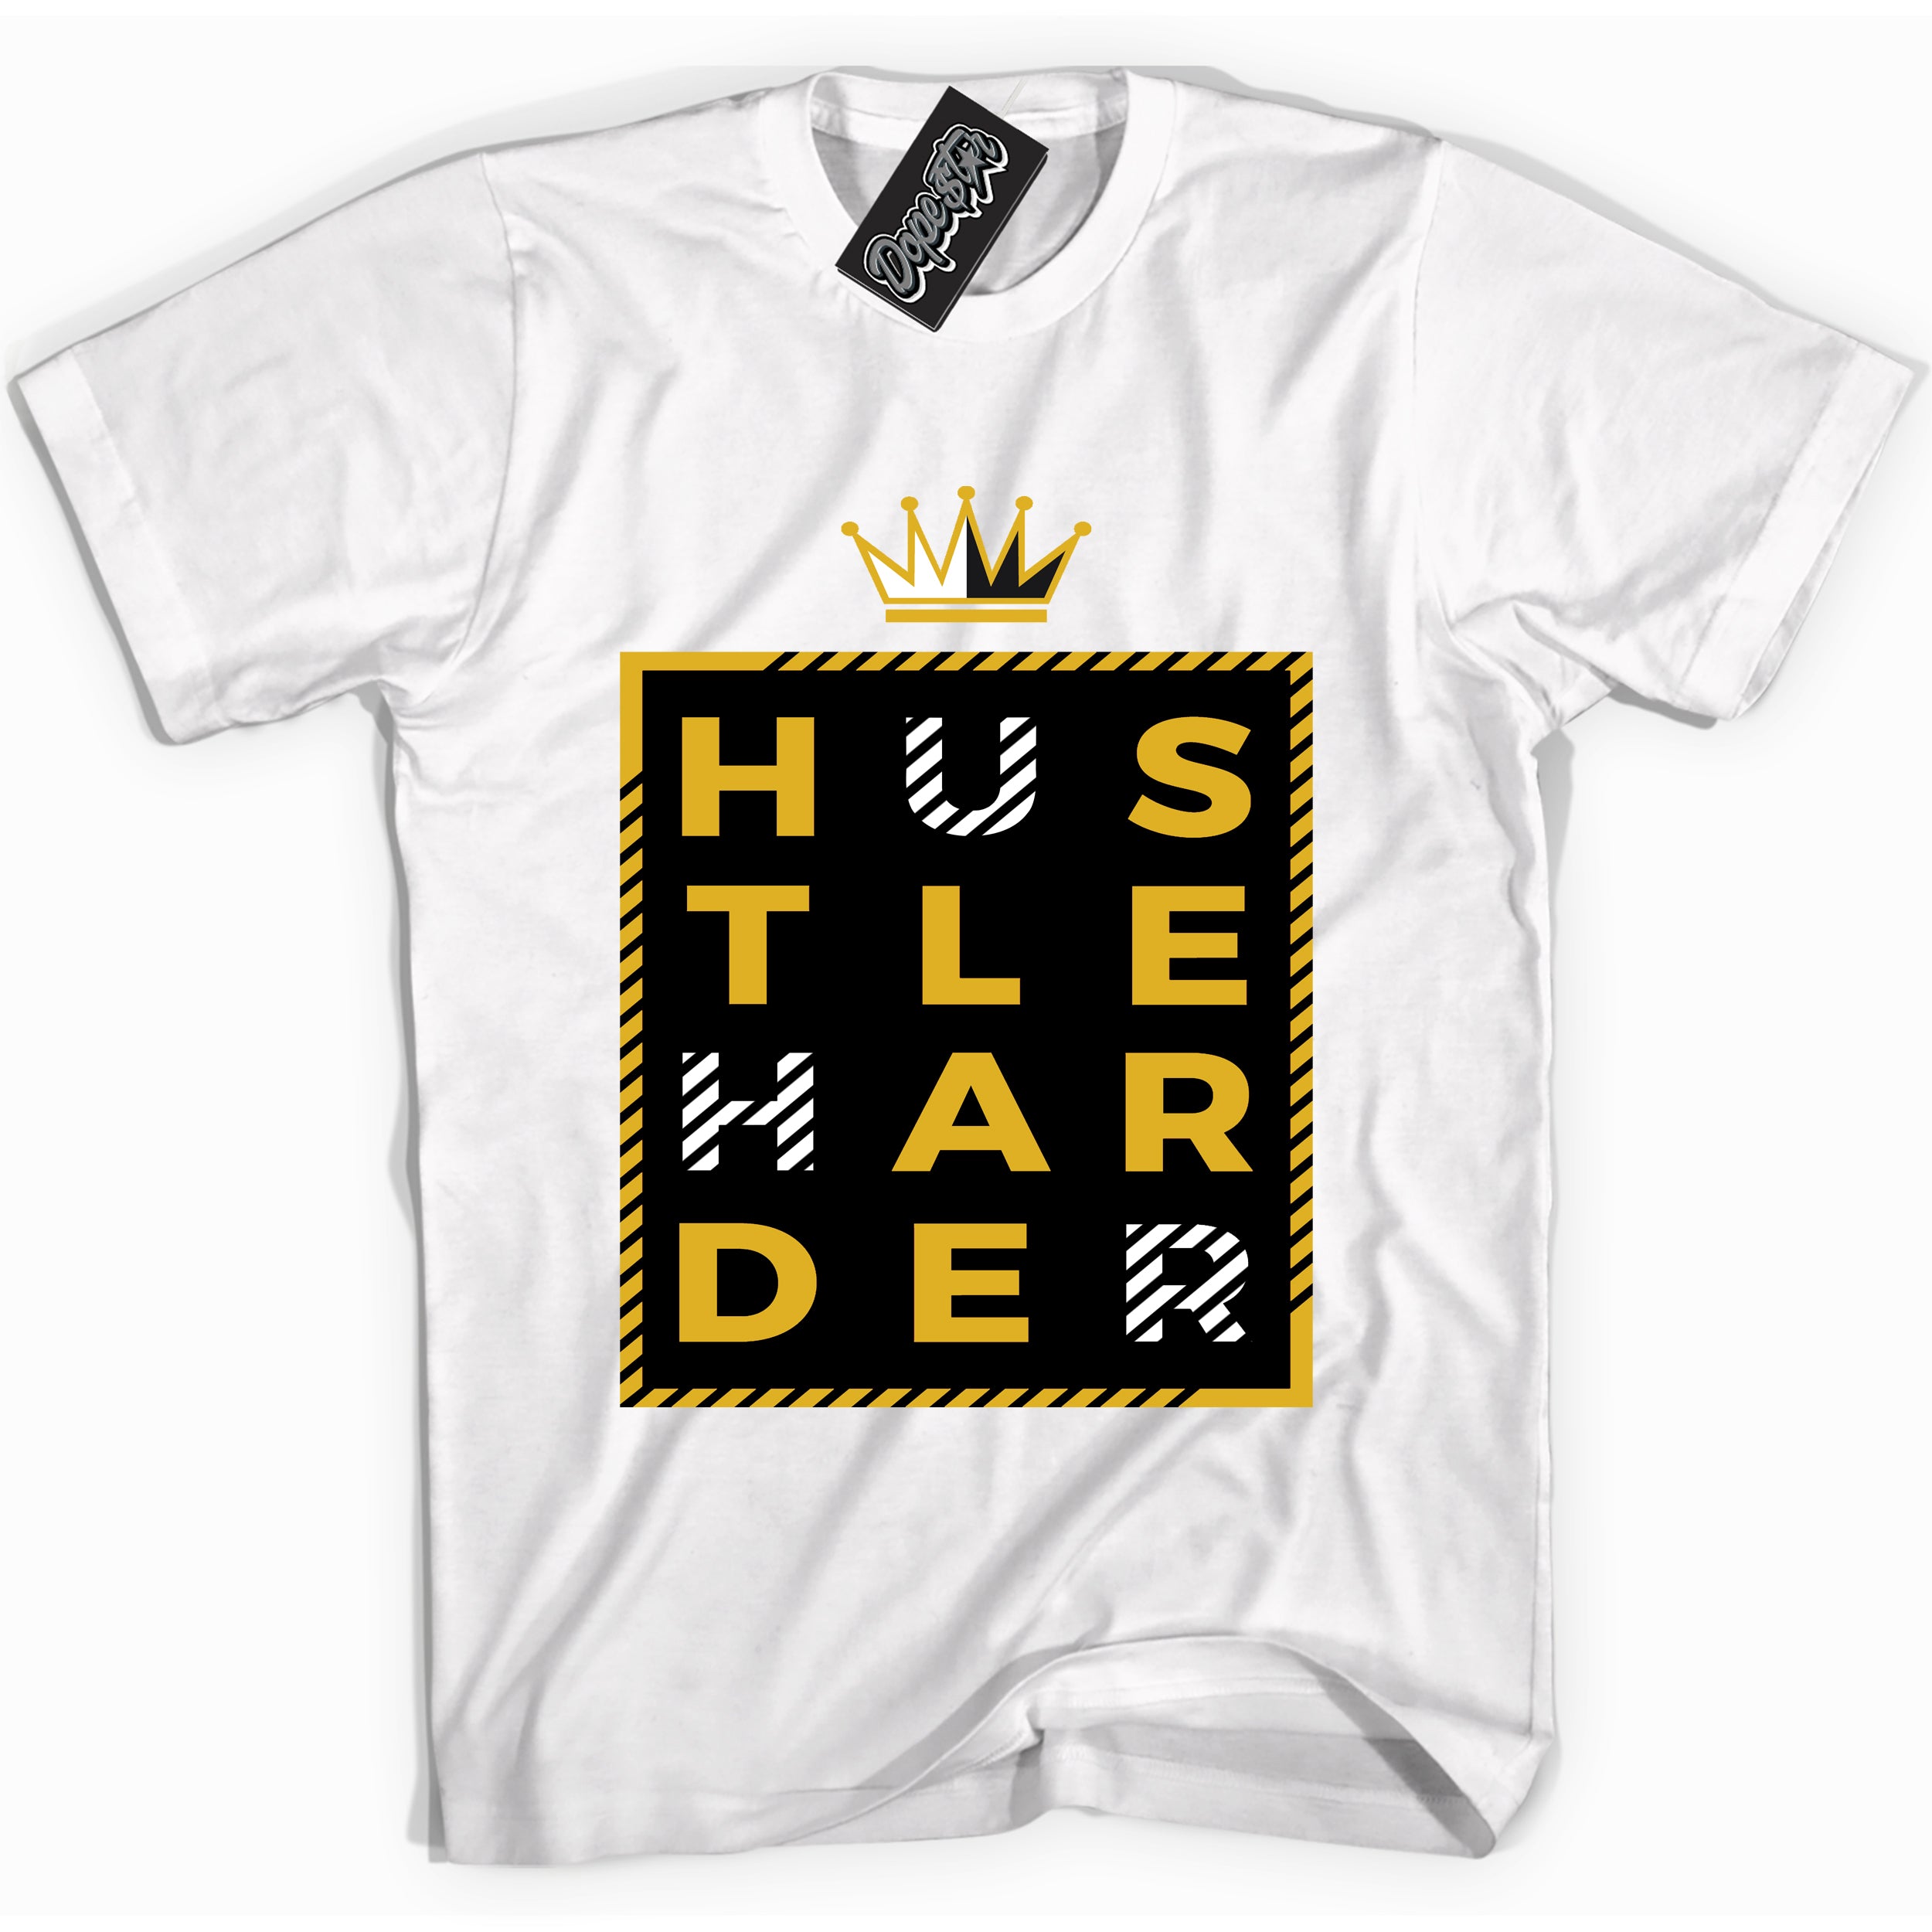 Cool White Shirt With Hustle Harder design That Perfectly Matches AIR JORDAN 6 RETRO YELLOW OCHRE Sneakers.